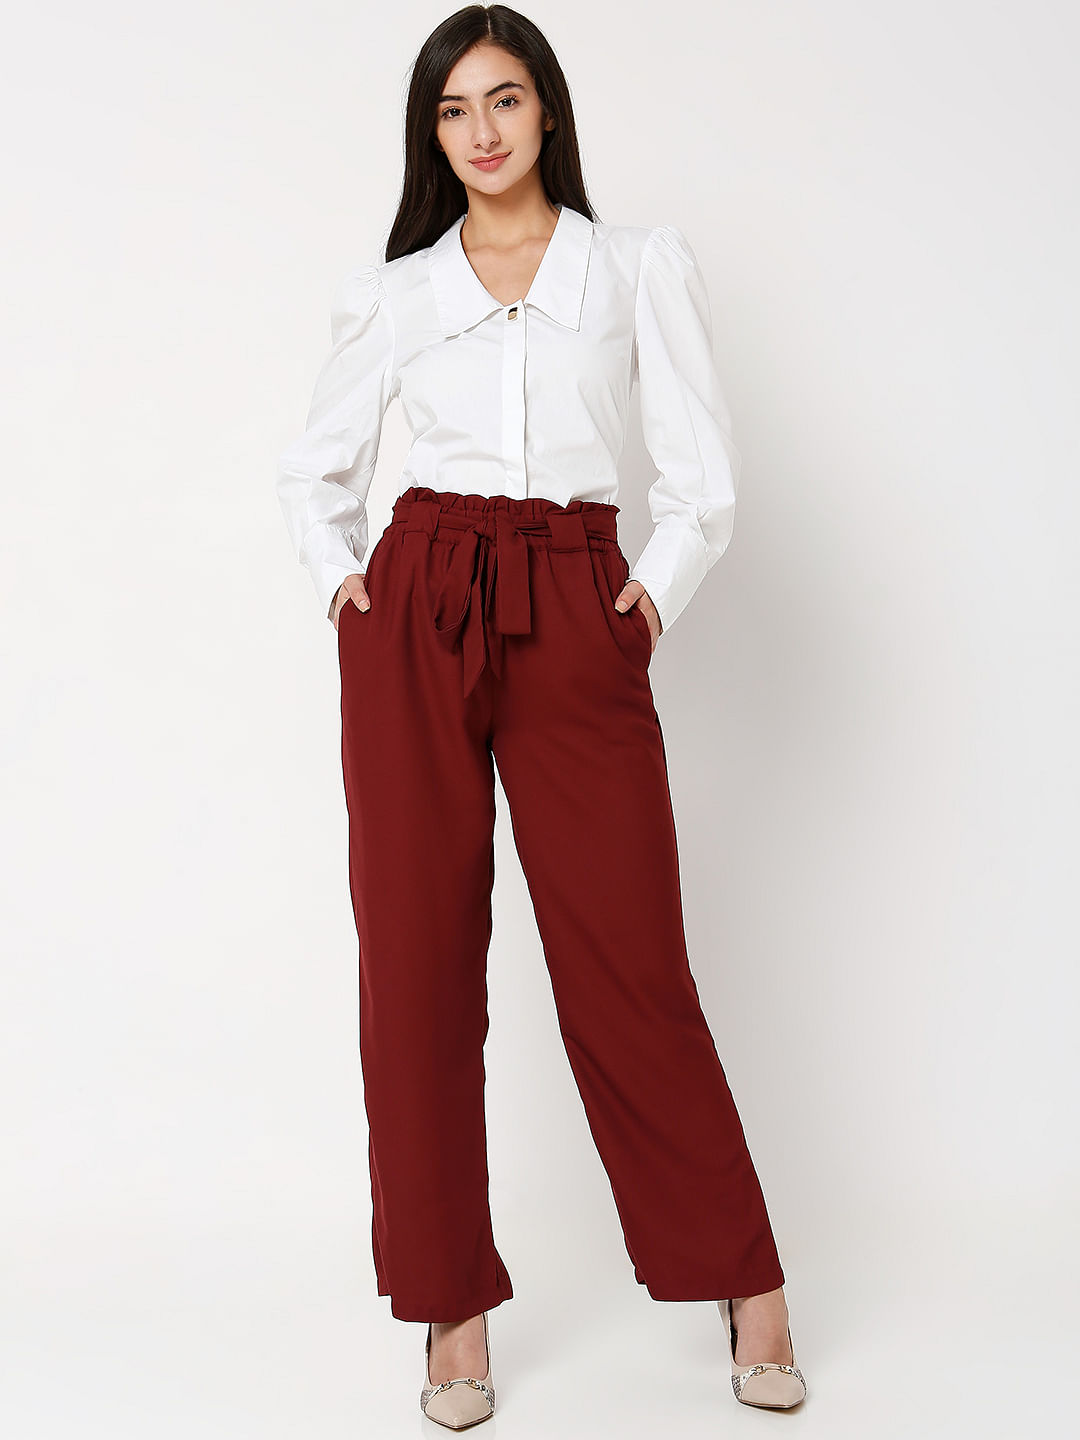 Chic Wine Red Trousers  Paperbag Waist Pants  Red Office Pants  Lulus